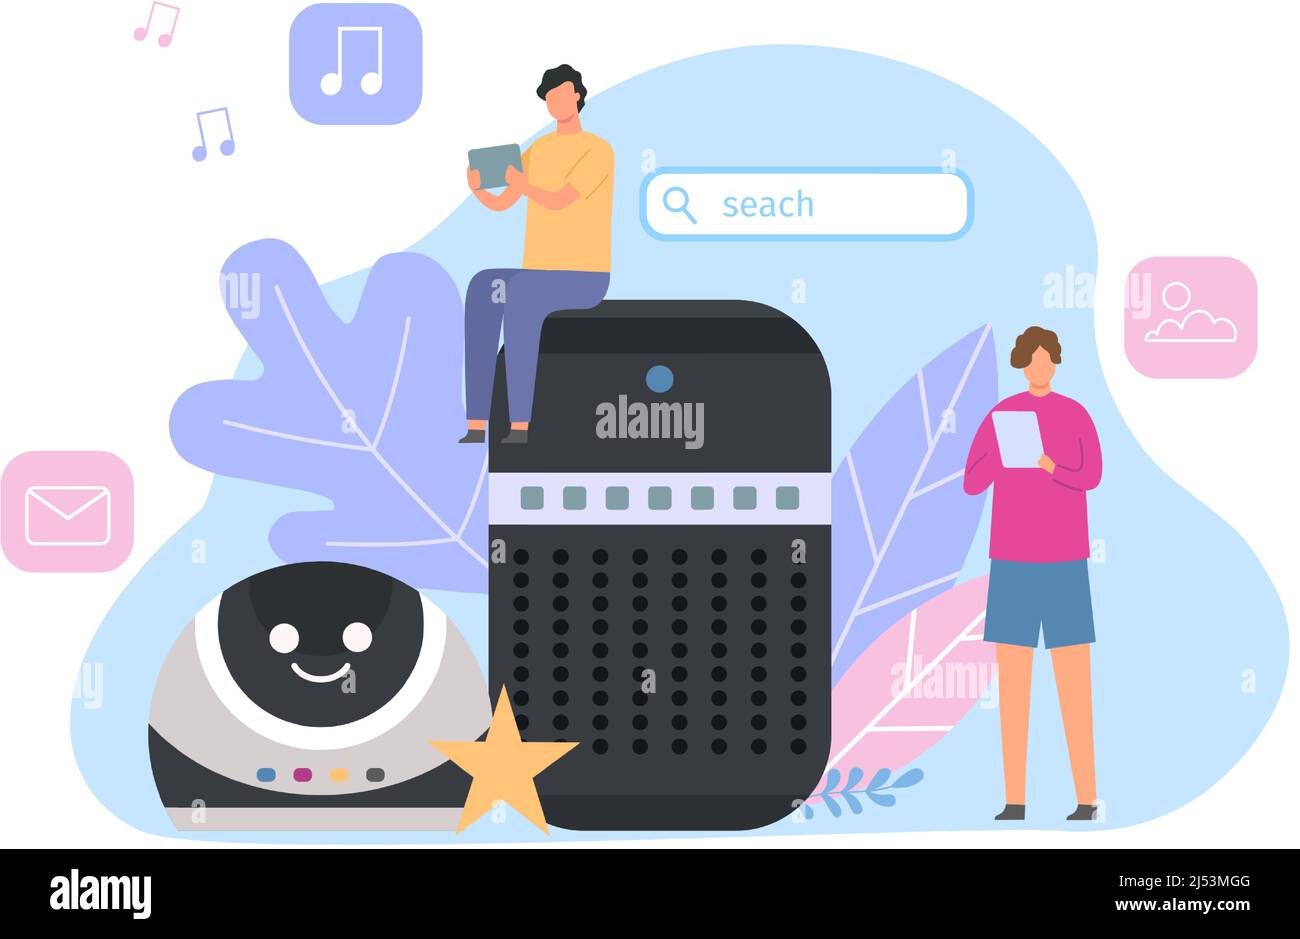 Interactive smart speaker ai and voice assistant Stock Vector